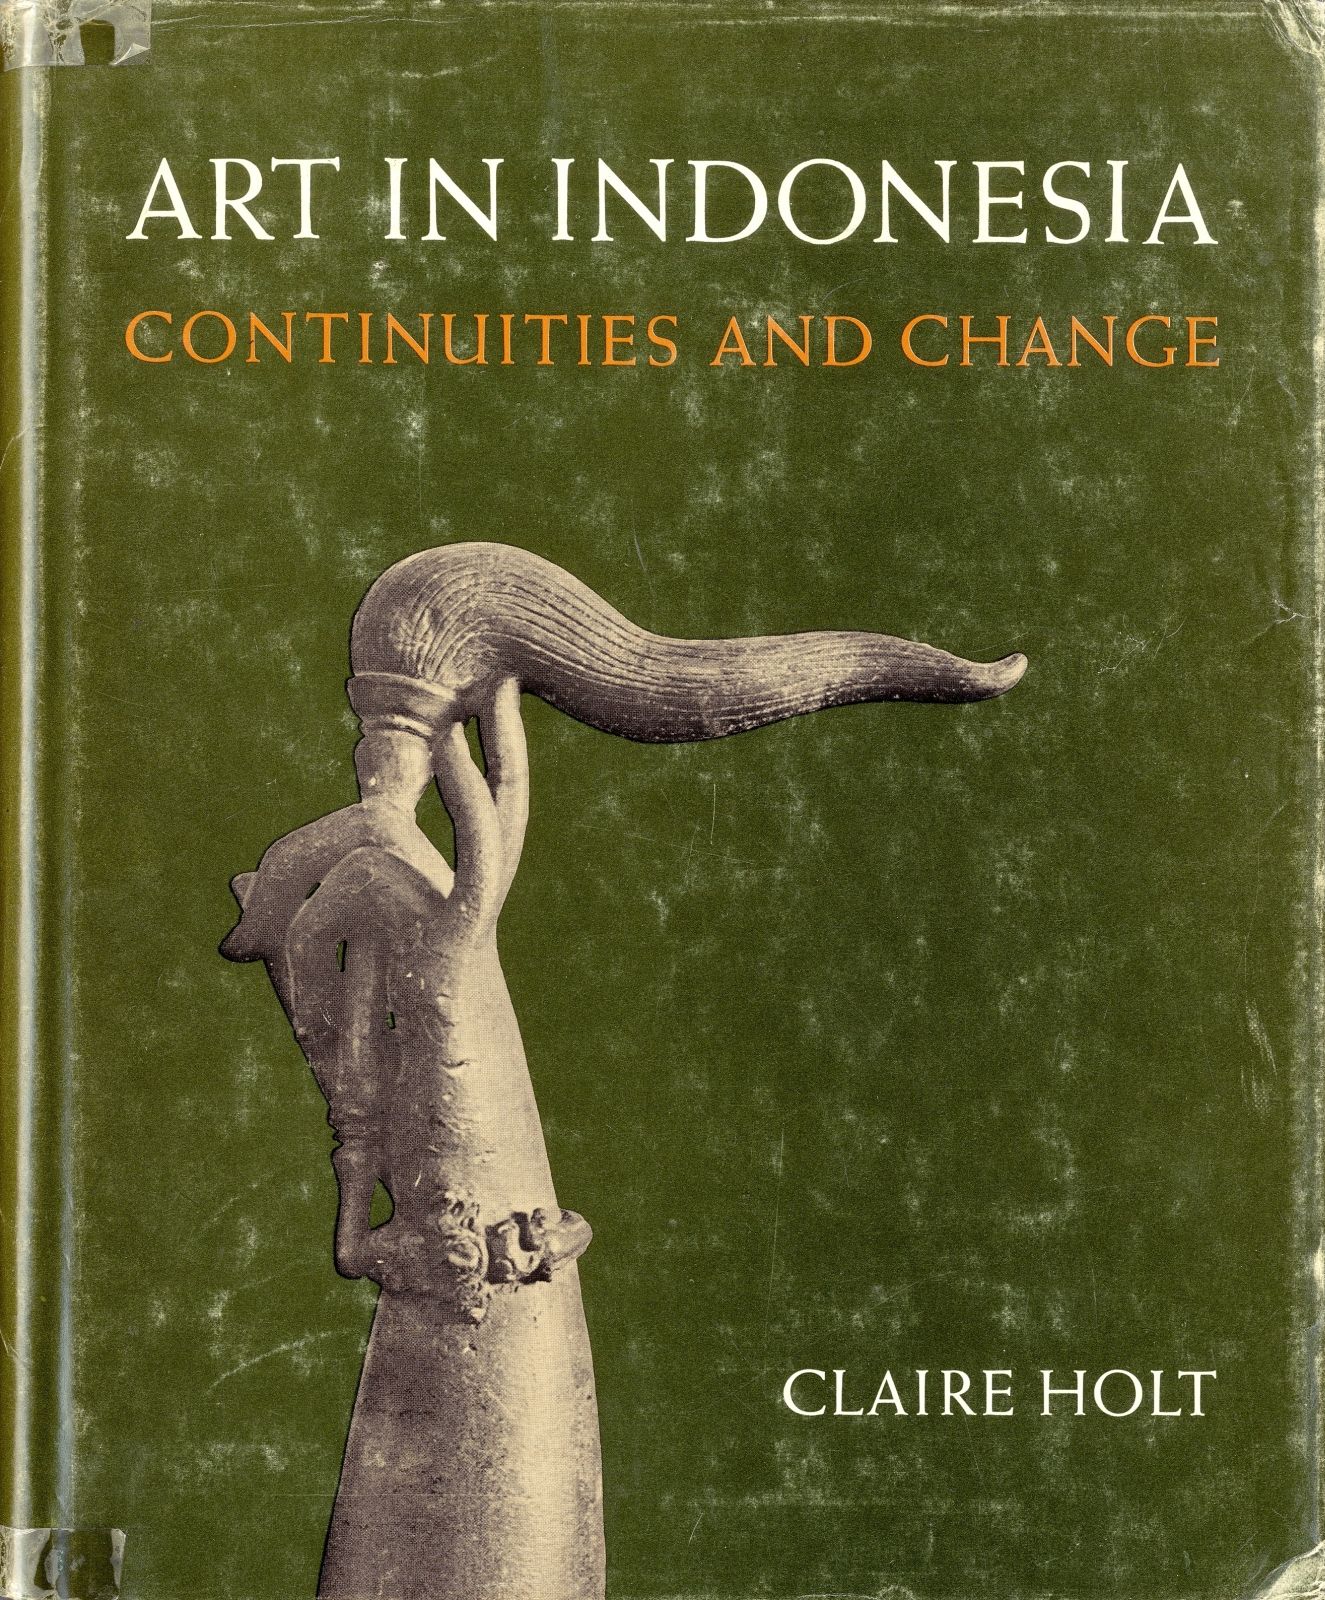 Null Libro de Arte, Claire Holt Art, Art in Indonesia, 1967 Continuities and cha&hellip;